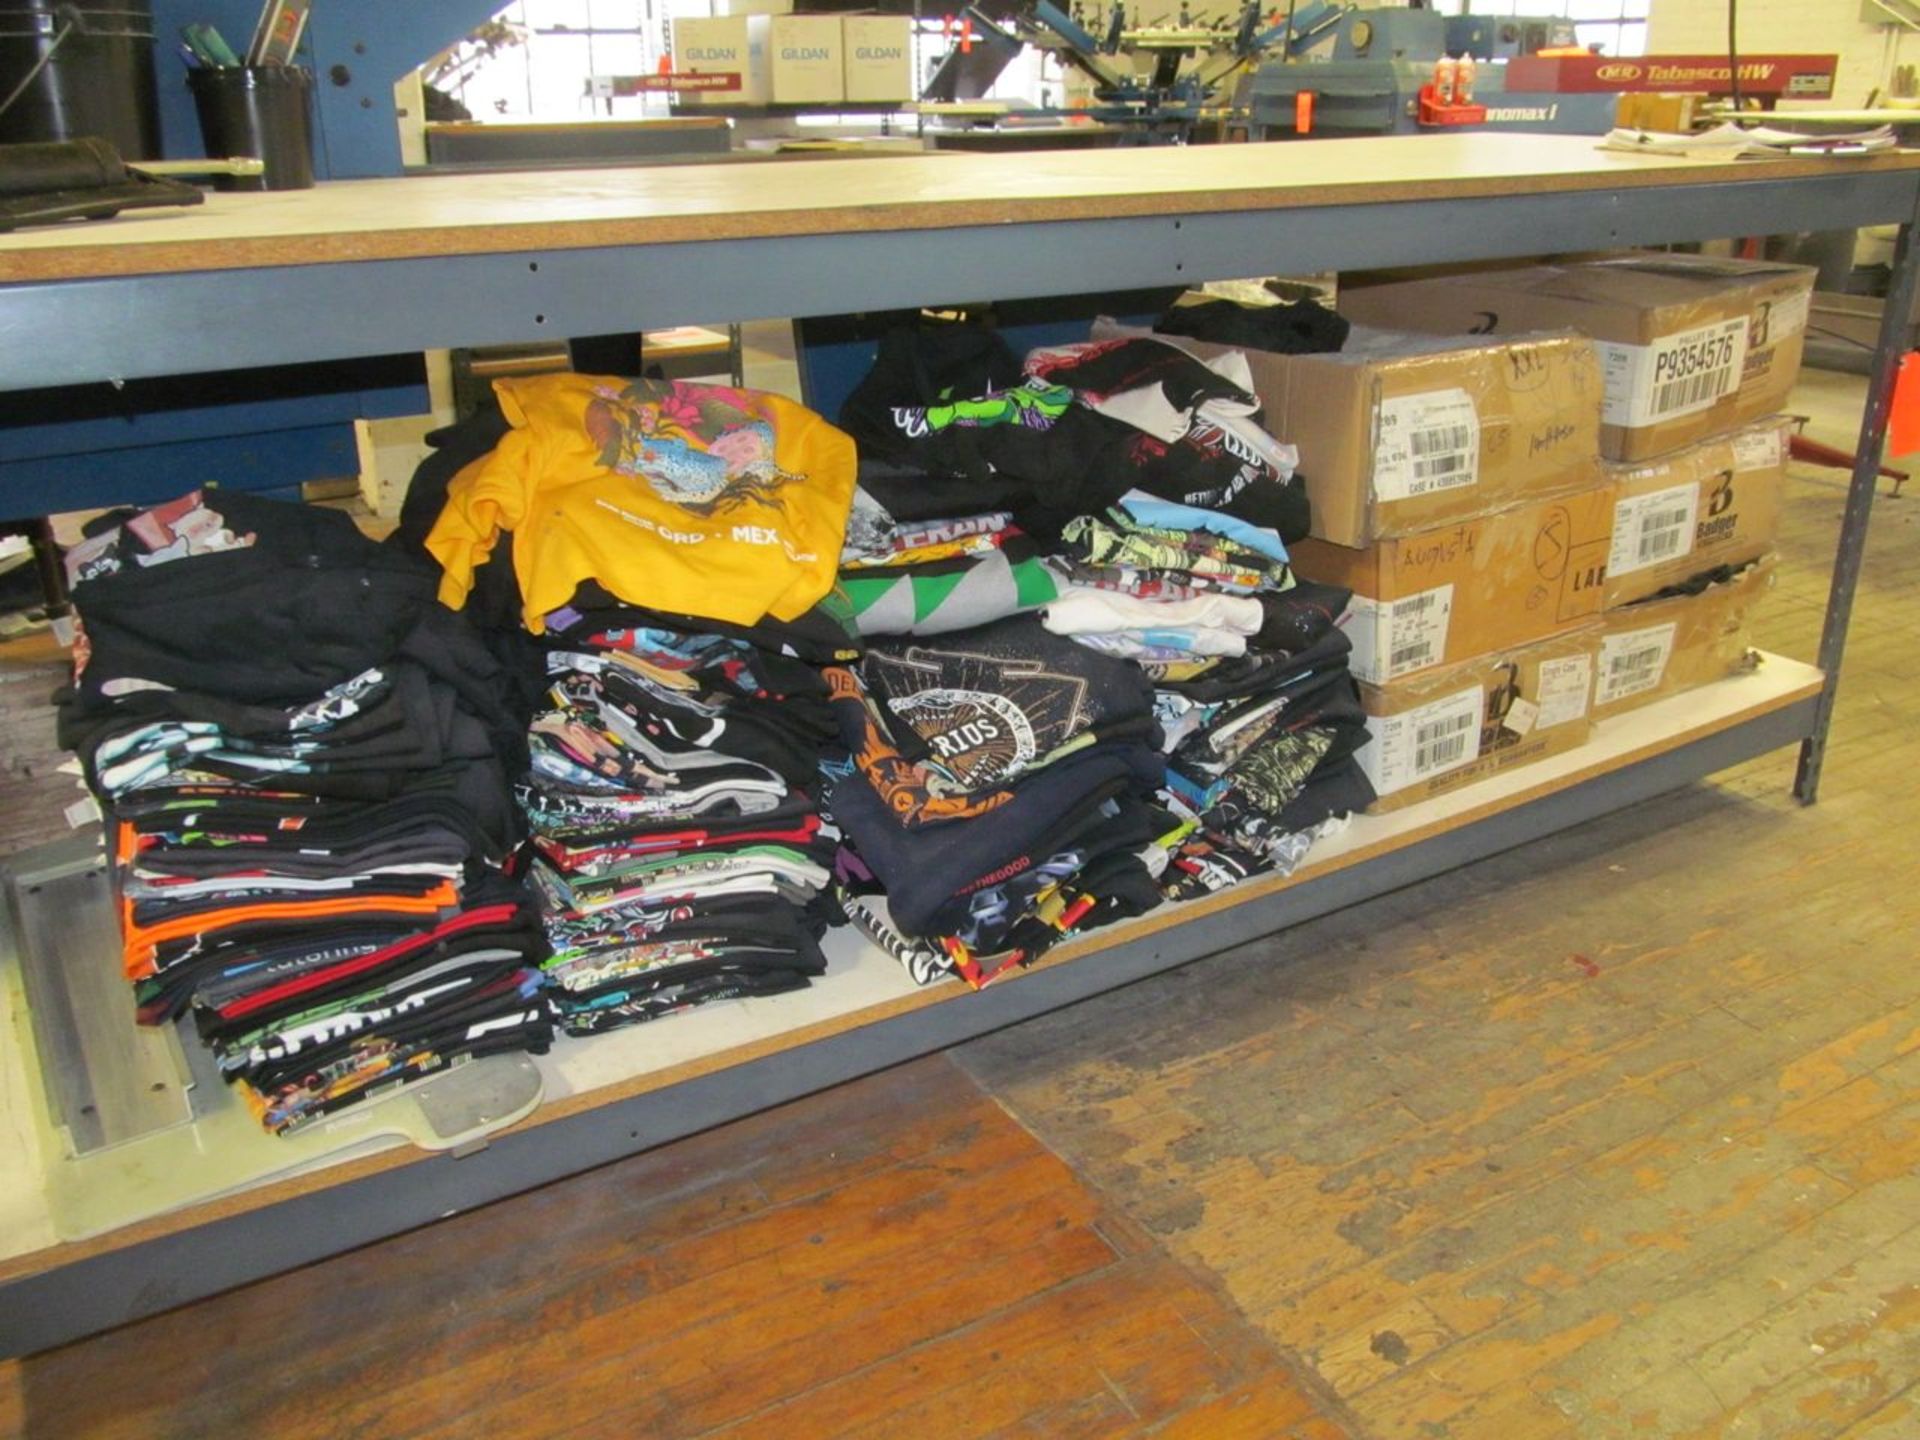 Lot - Assorted Mis-Print T-Shirts, Under Lot #: 236 (No Work Bench)